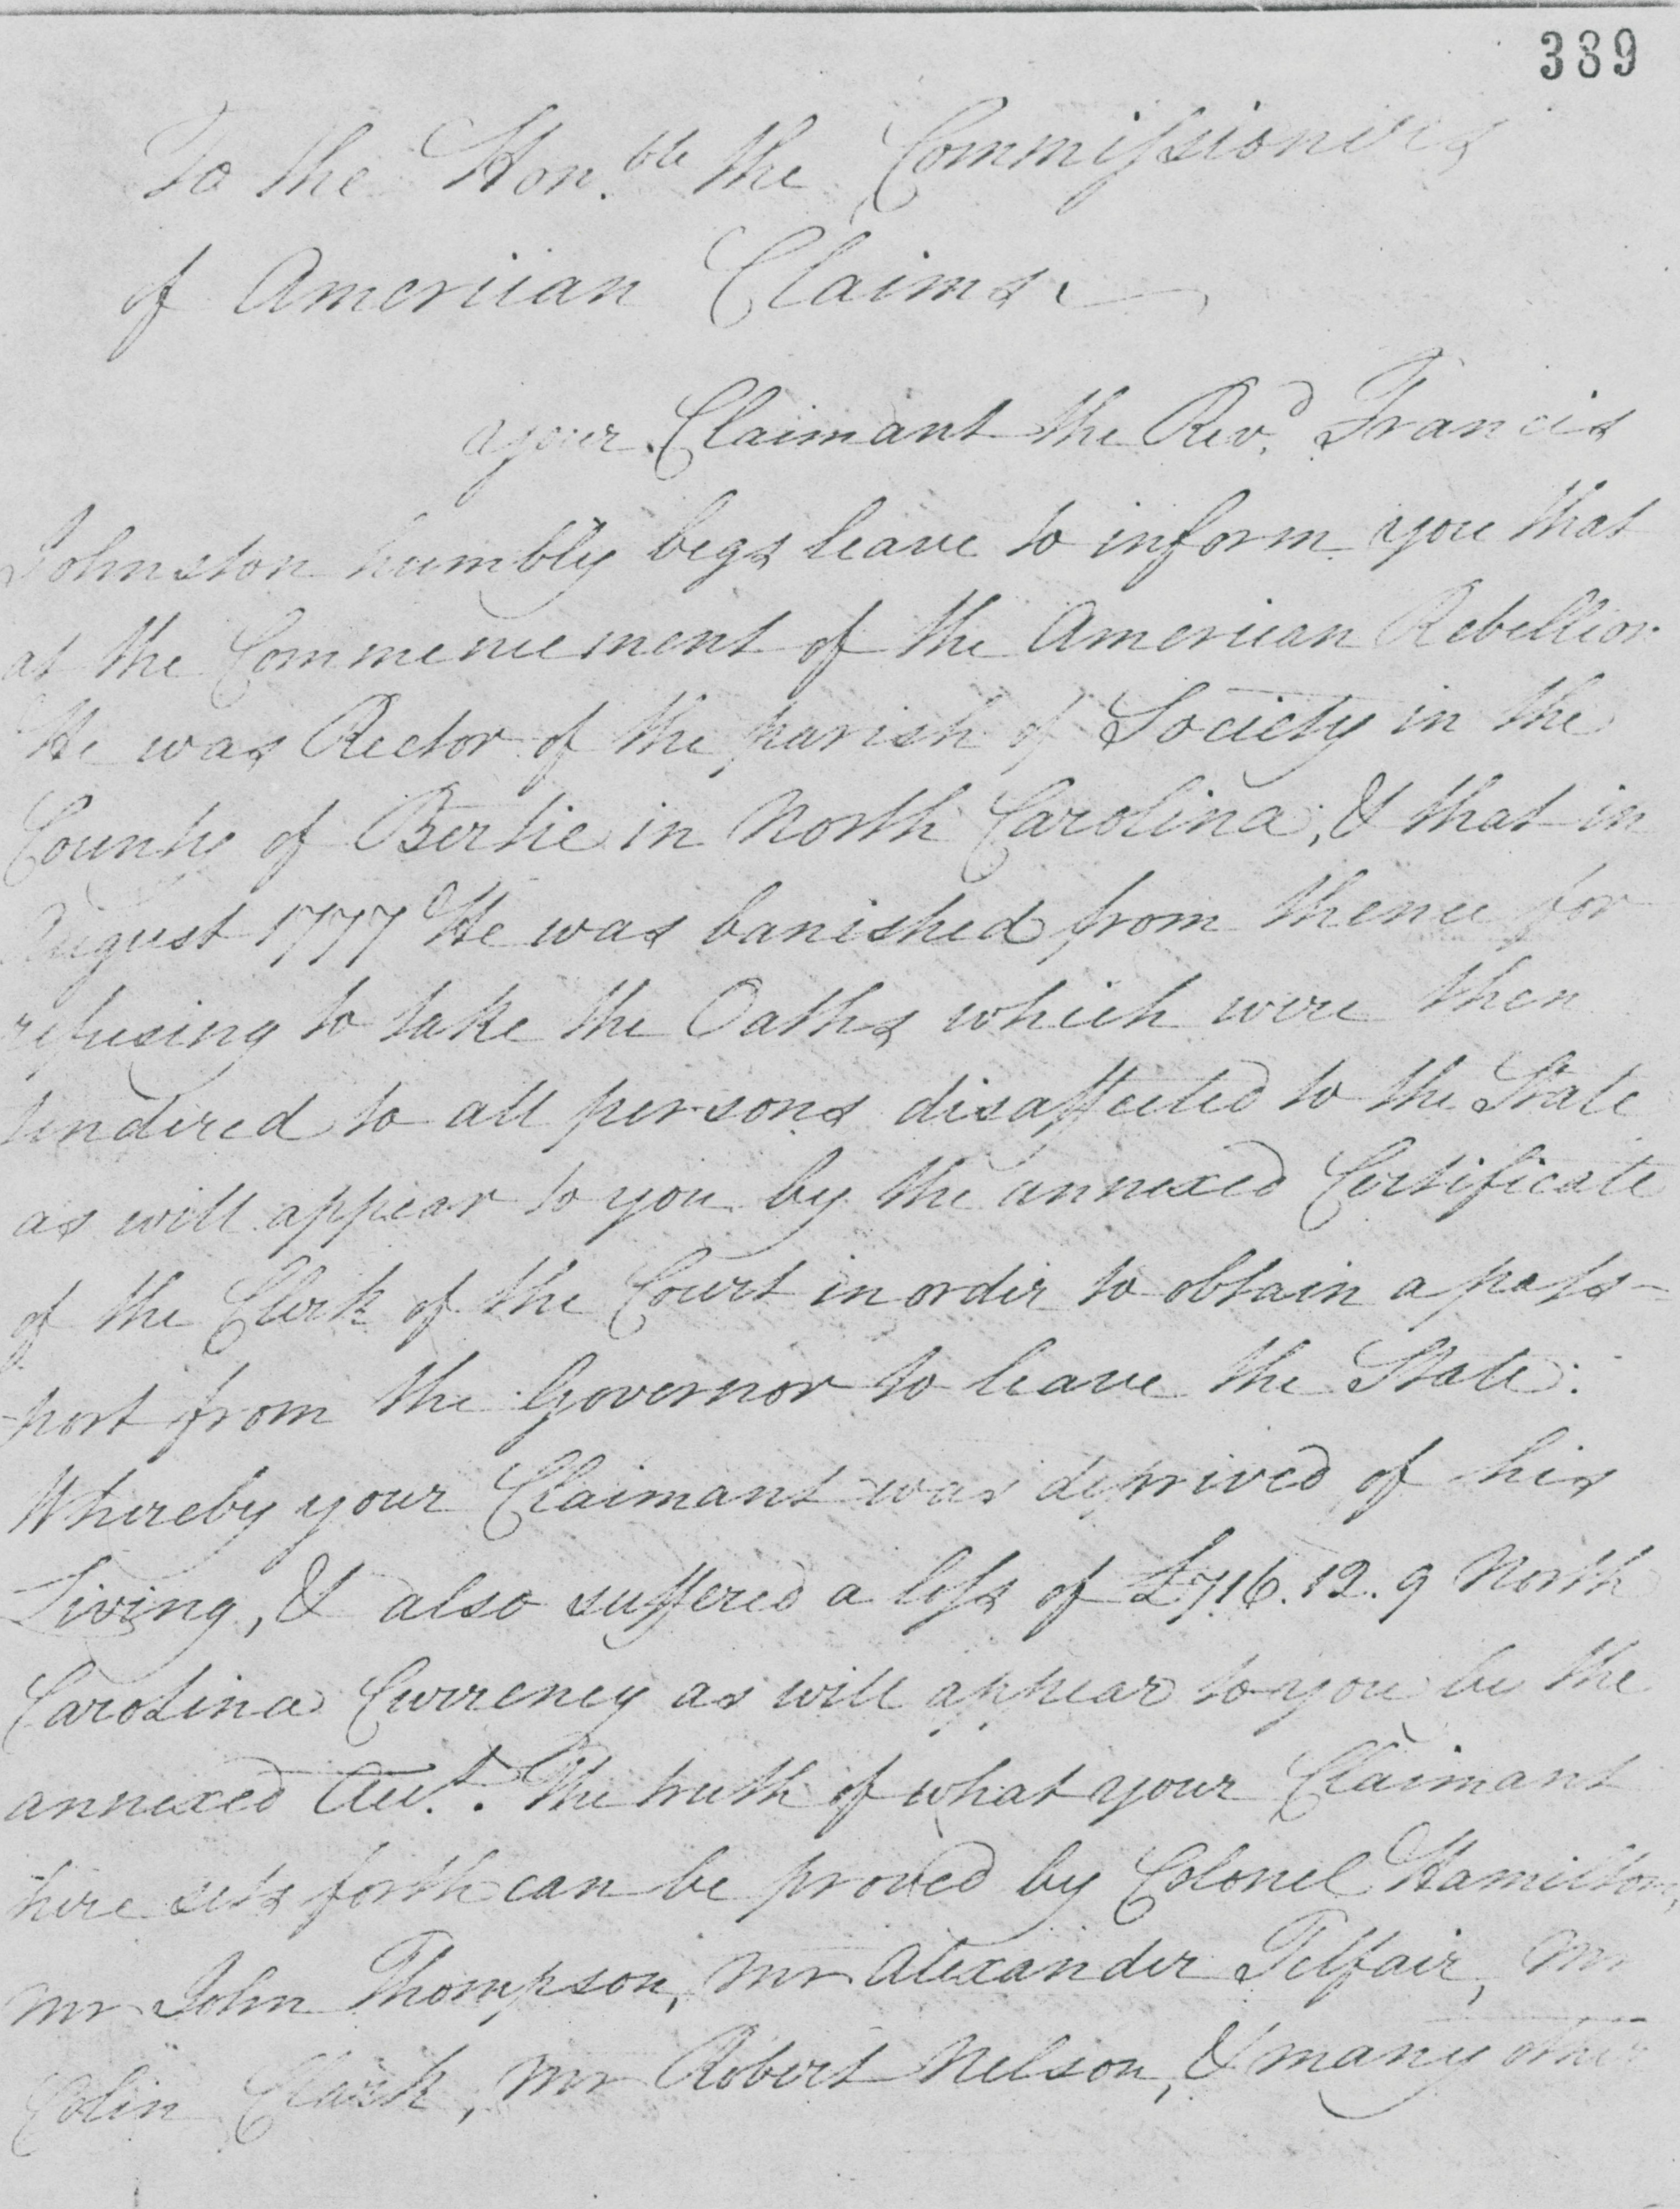 Claim from Francis Johnston to the Commissioners of American Claims, 29 May 1791, page 1